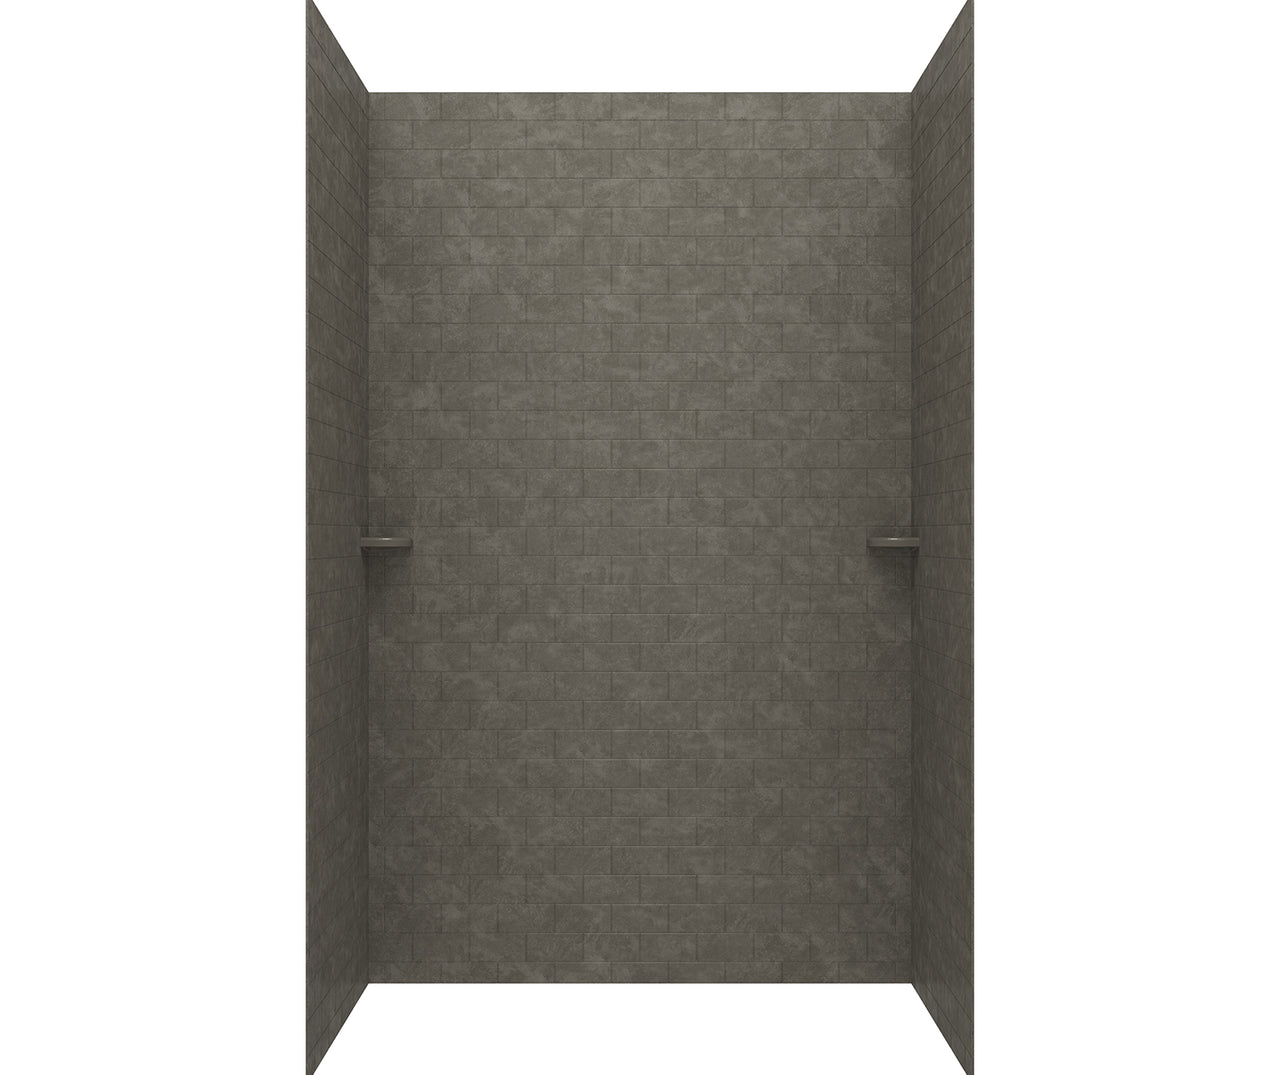 STMK72-3662 36 x 62 x 72 Swanstone Classic Subway Tile Glue up Tub Wall Kit in Charcoal Gray